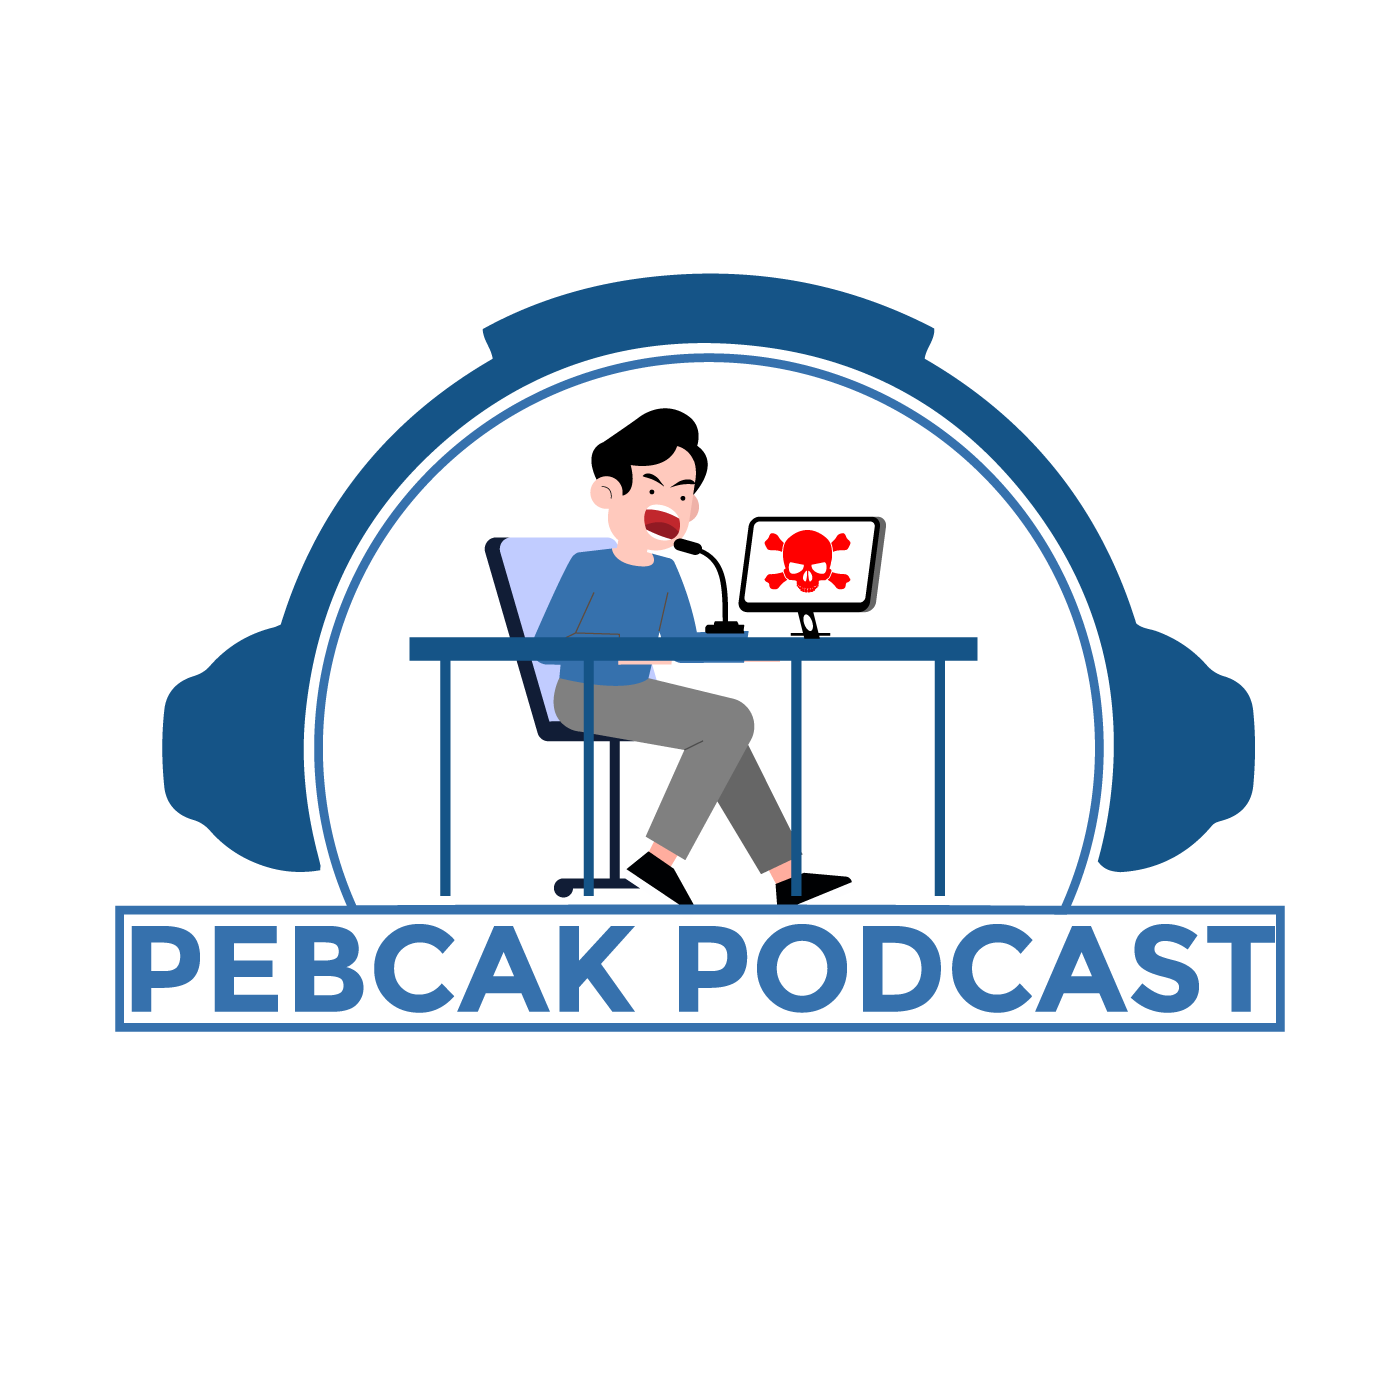 PEBCAK Podcast: Information Security News by Some All Around Good People